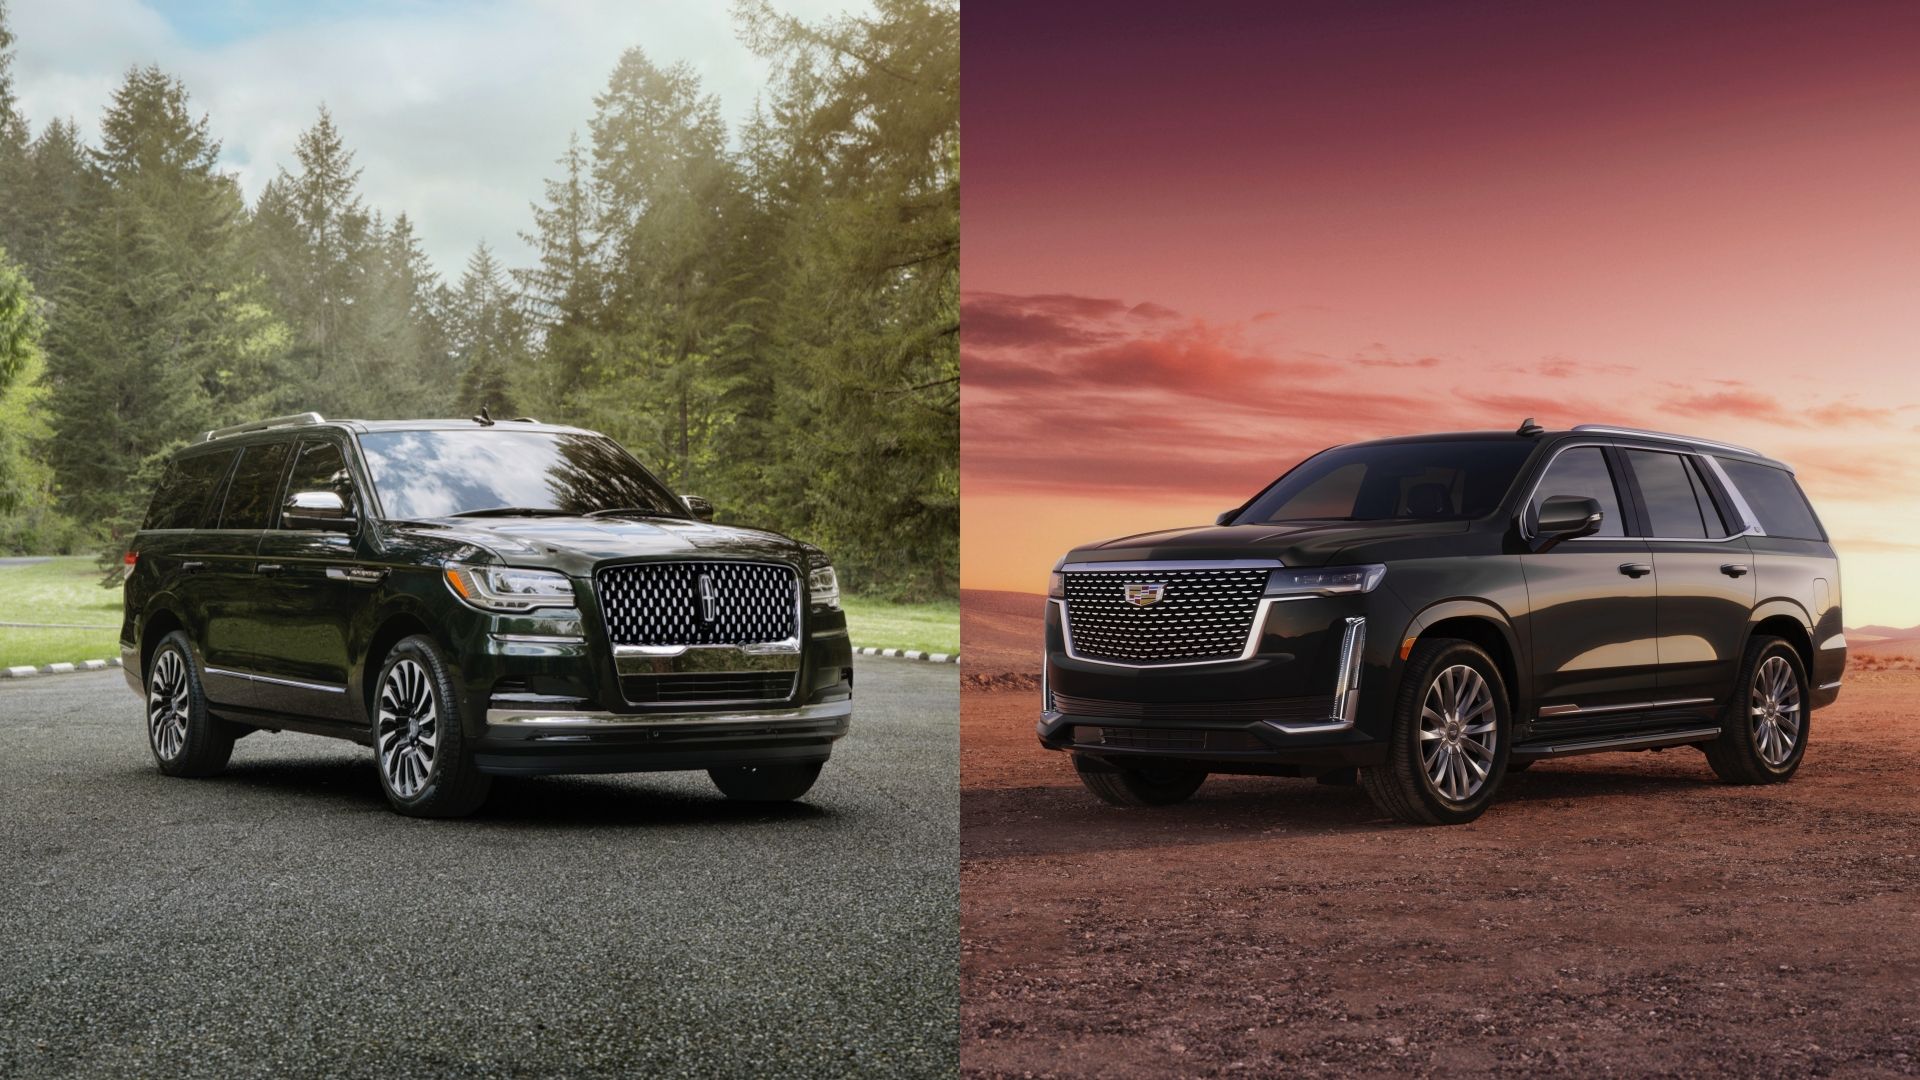 Does The Escalade Really Have An Edge Over The Navigator?